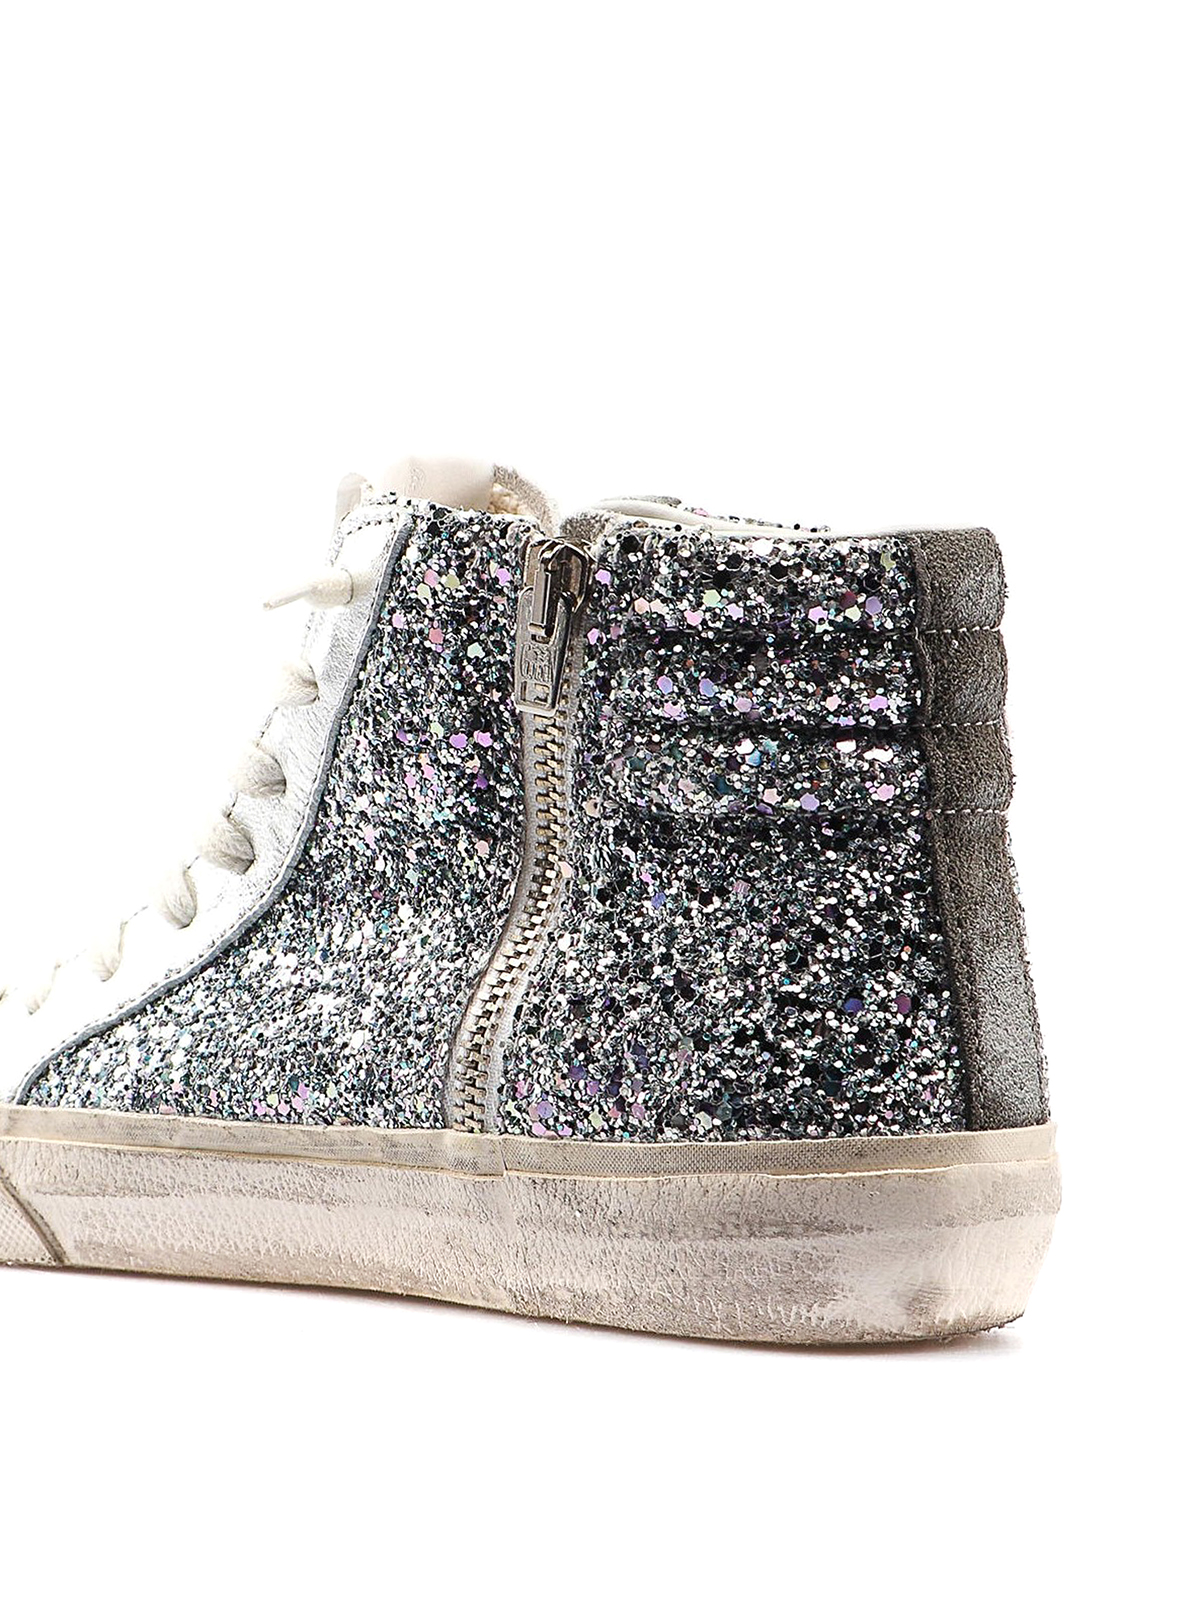 golden goose slide sneakers in silver laminated leather and glitter